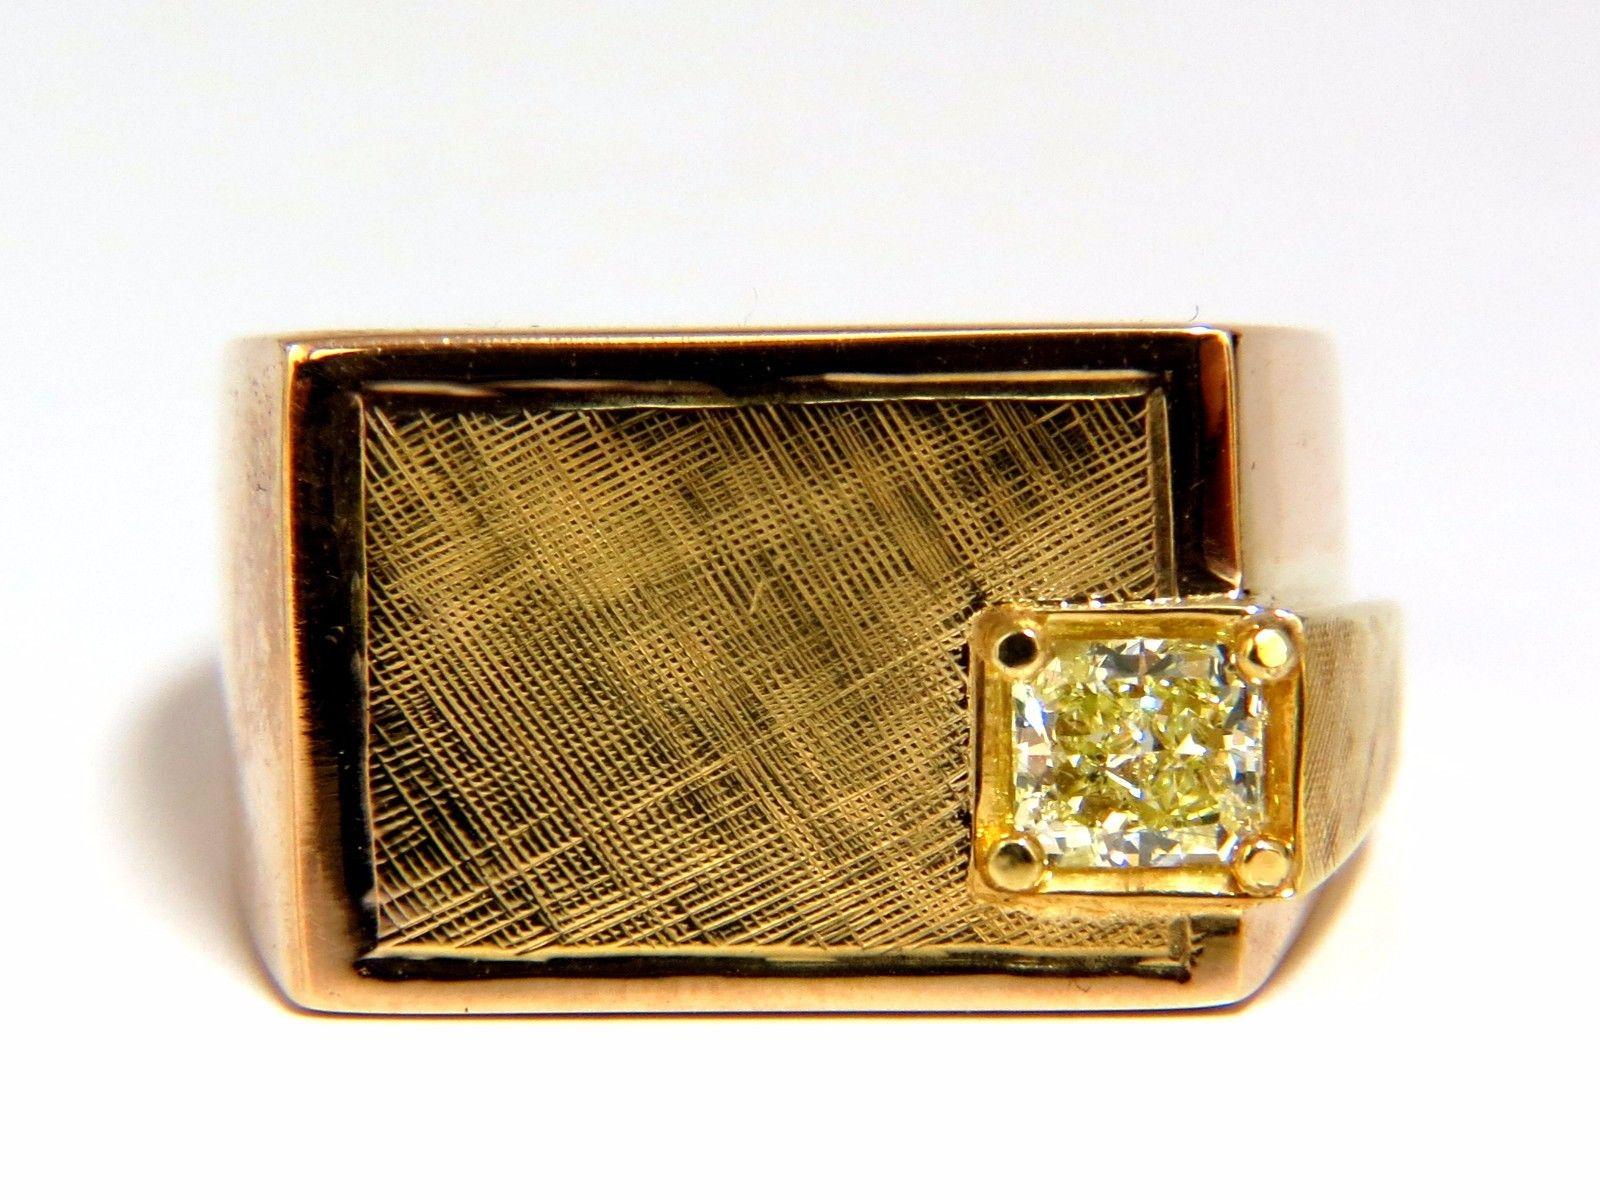 Men's Rectangular Deck & Fancy Ring.

.47ct. natural princess cut diamond.

Si-1 clarity

Fancy Light Yellow color

Natural, Earth Mined.

3.9 X 4.9mm

14kt. Rose gold (with green gold top finish).

19.9 grams.

Ring is 12.5mm wide 

current ring